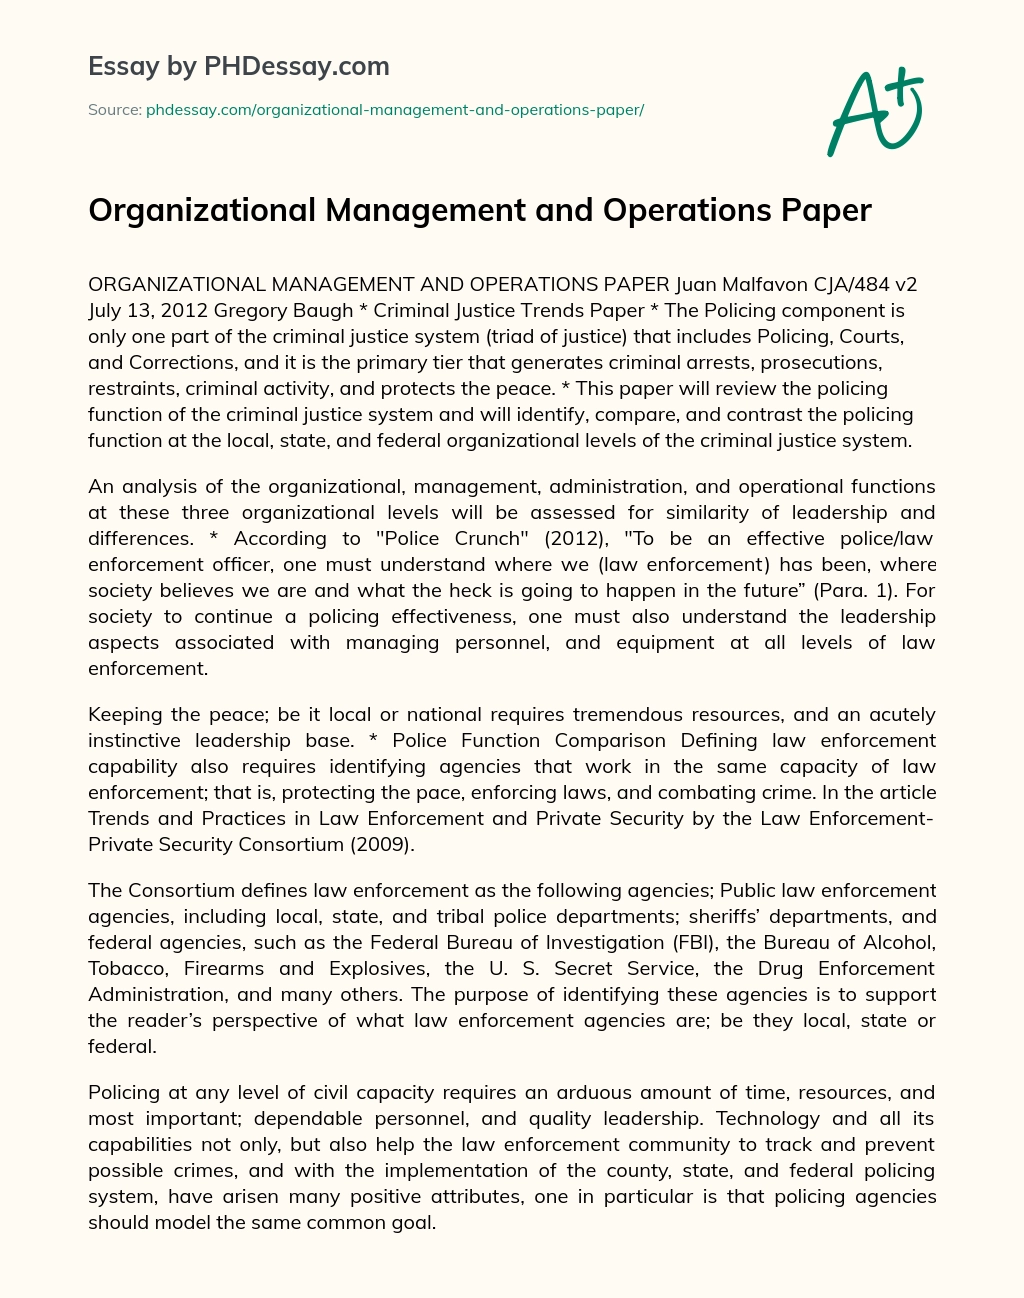 Organizational Management and Operations Paper essay